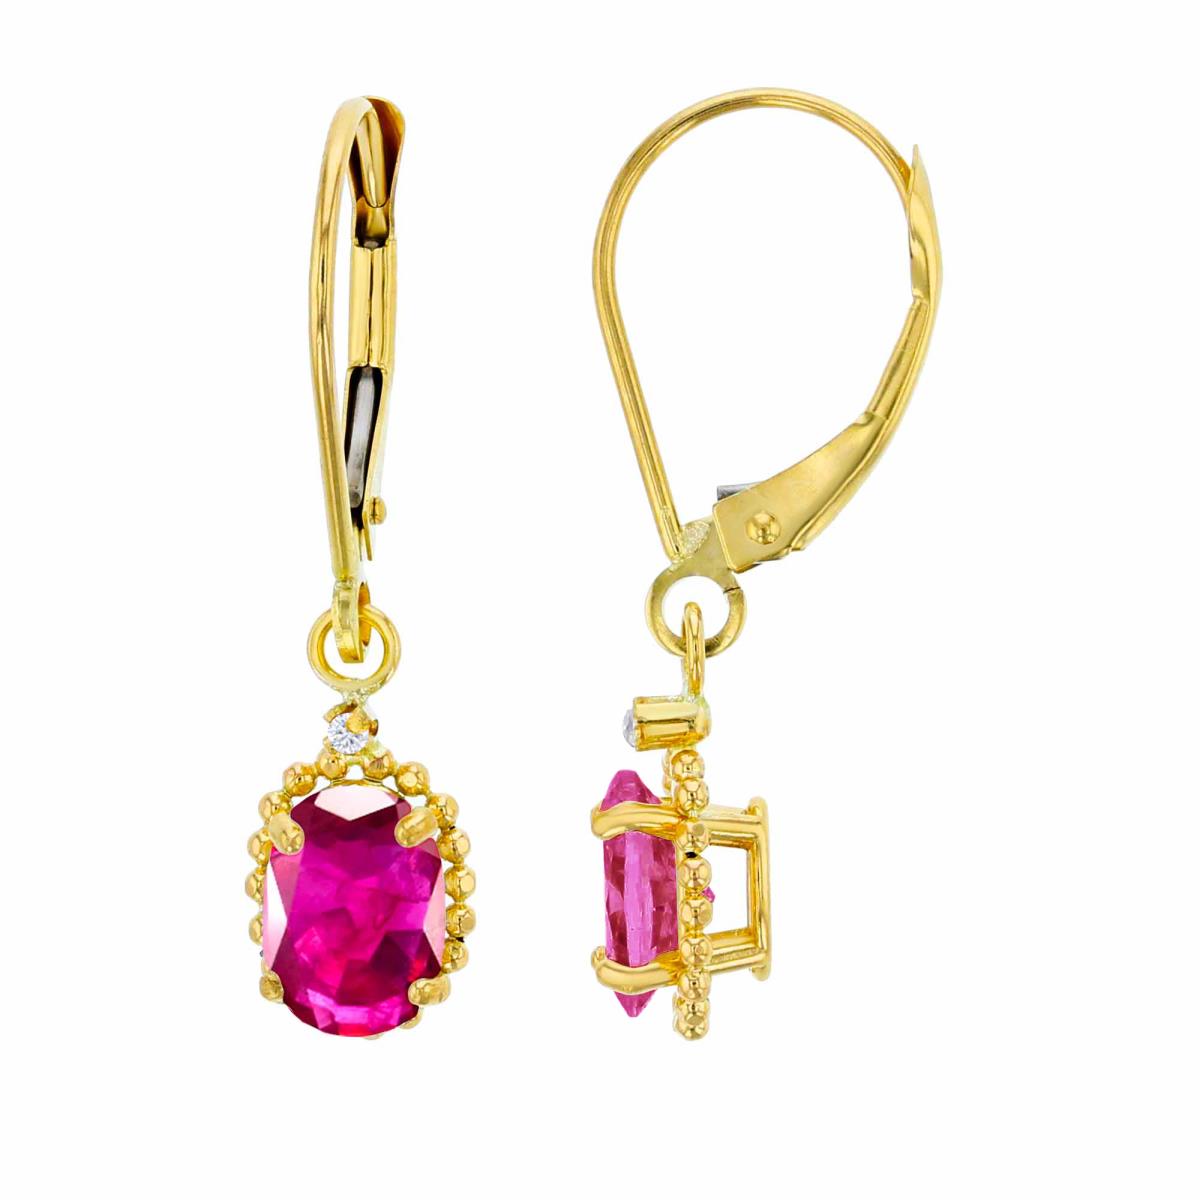 10K Yellow Gold 1.25mm Rd Created White Sapphire & 6x4mm Ov Created Ruby Bead Frame Drop Lever-Back Earring